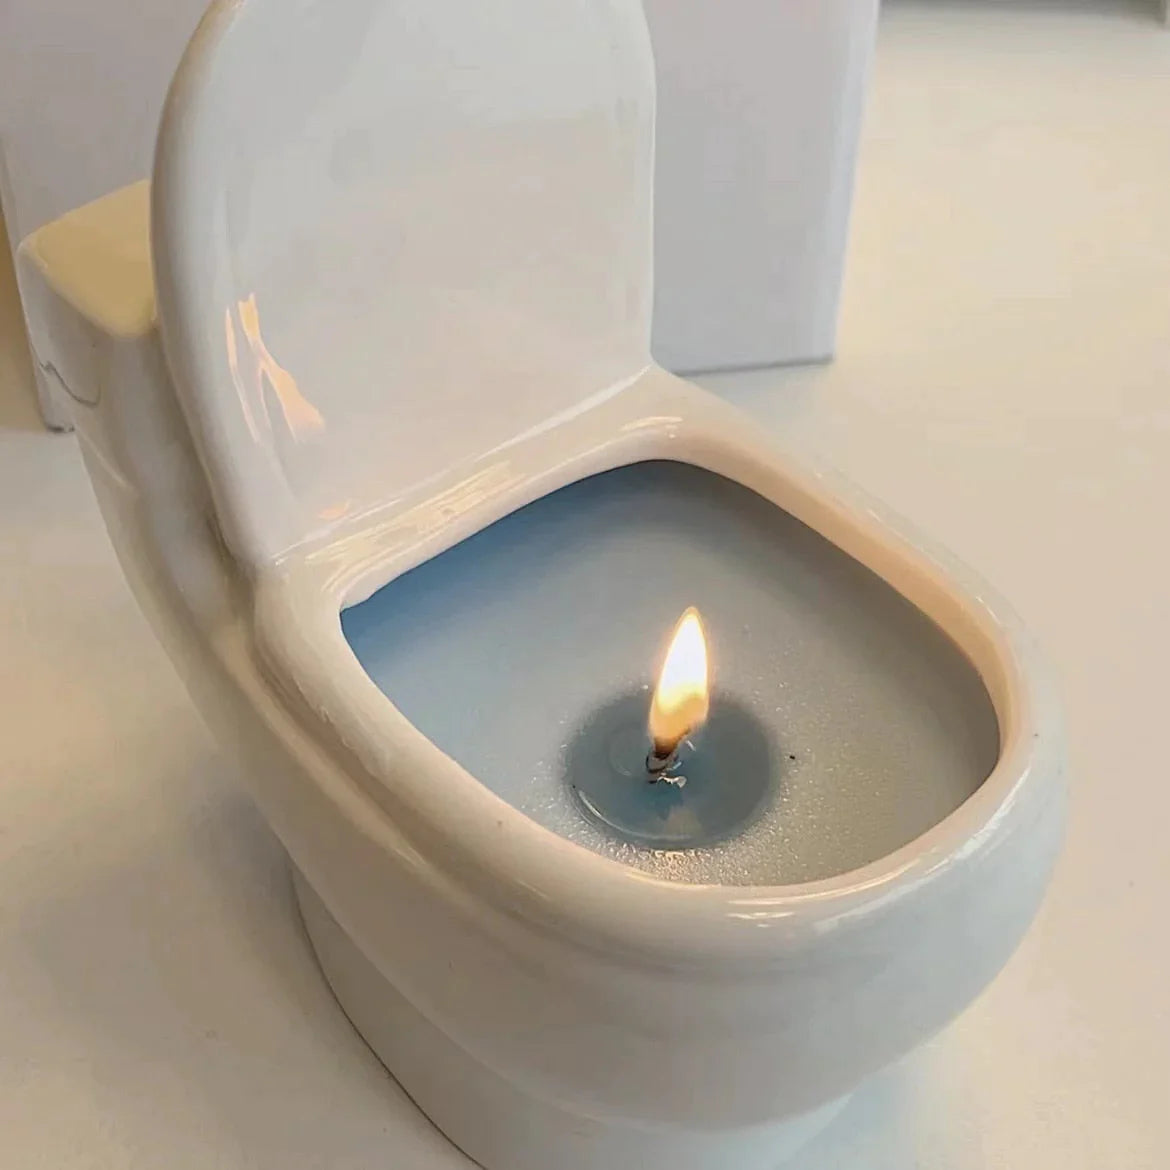 Creative Funny Toilet Aromatherapy Candle at $34.97 from OddityGate